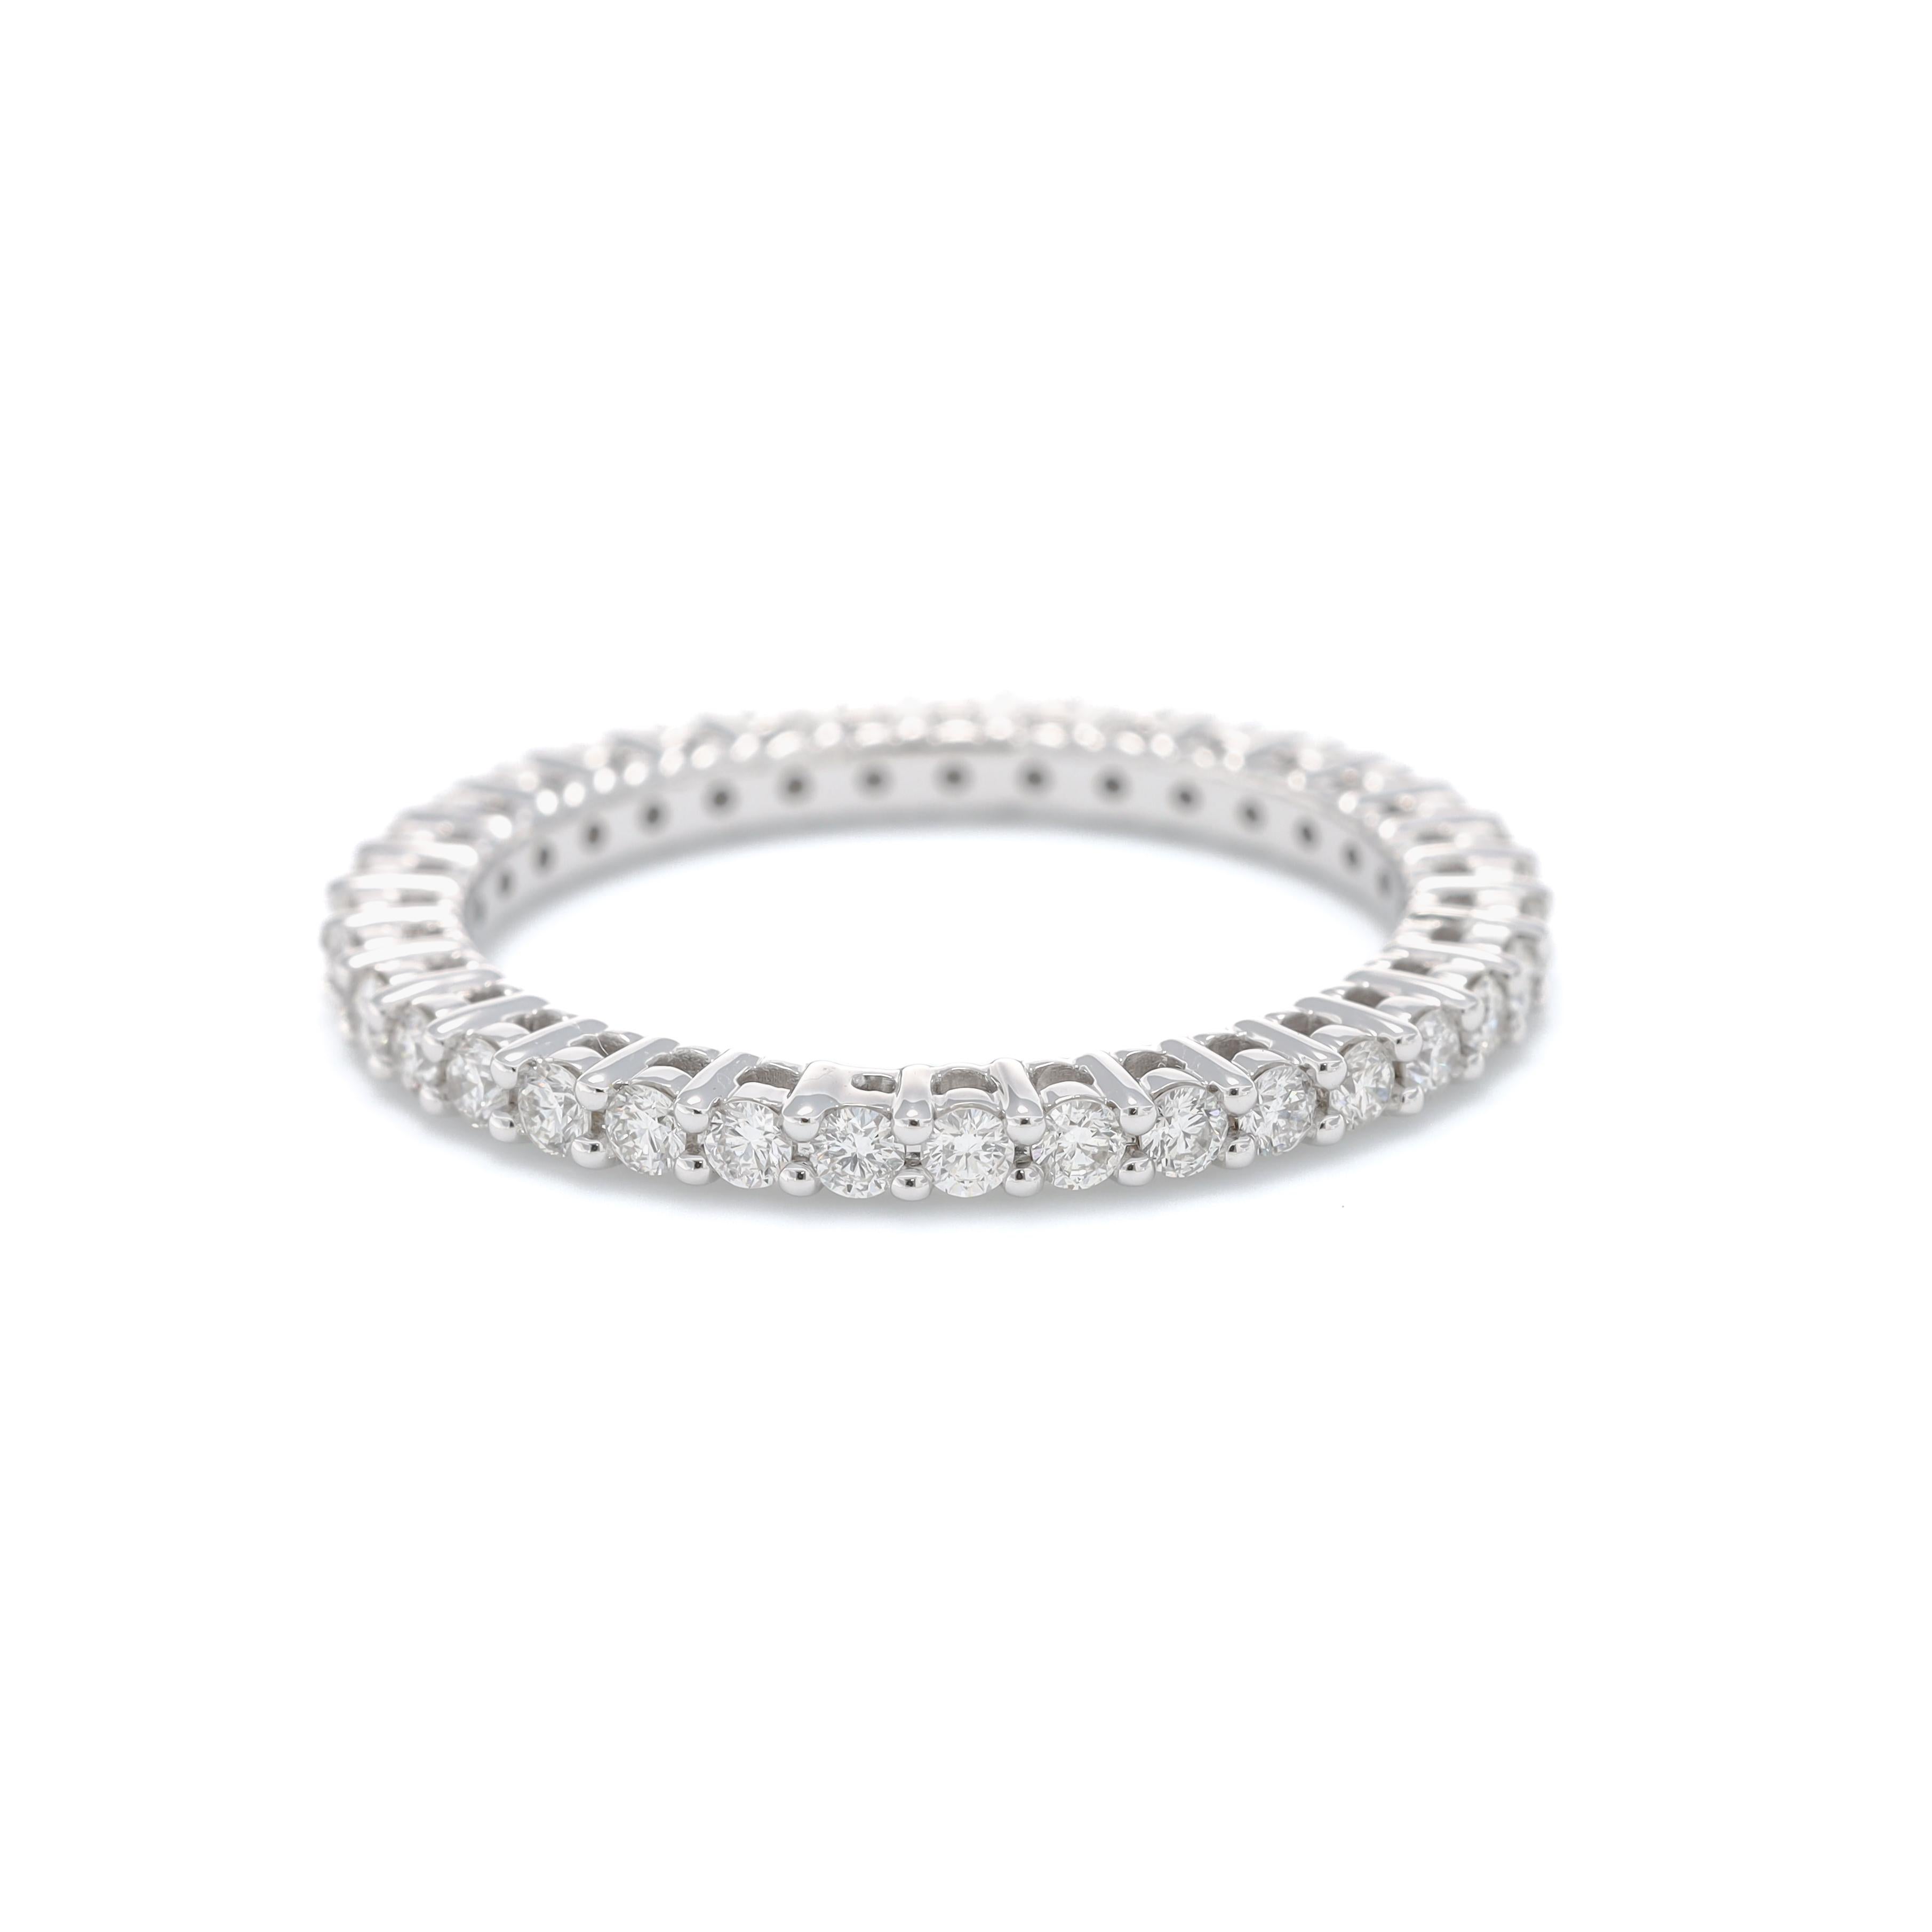 Indulge in the timeless allure of this exquisite diamond band, meticulously crafted from 18k White Gold to radiate elegance and sophistication. The band features a continuous row of round-shape diamonds, totaling 0.80 carats, set in a seamless and